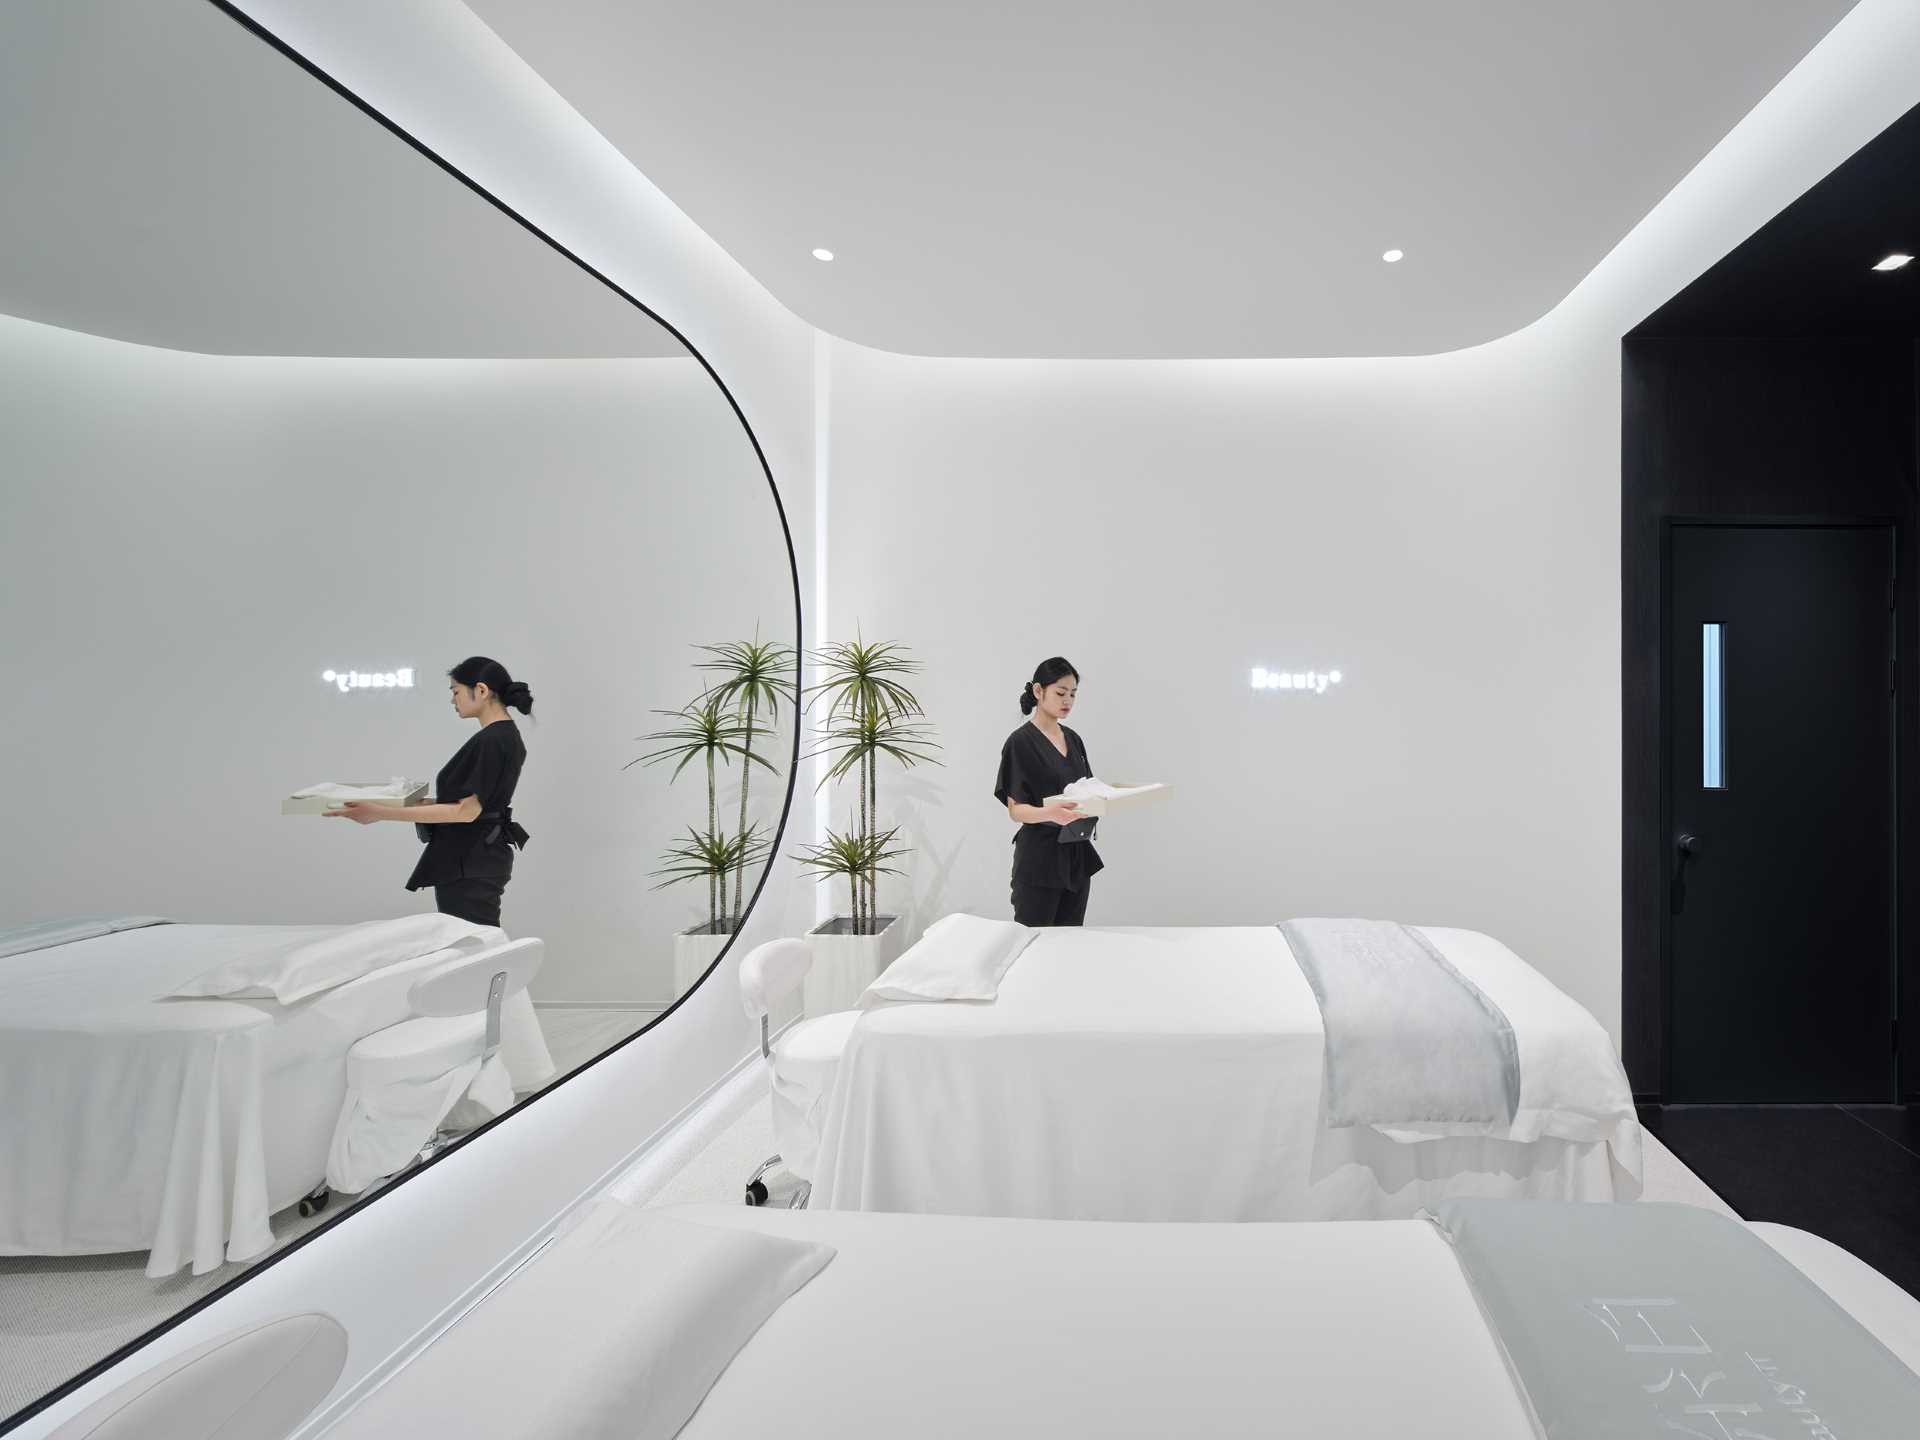 In the treatment rooms, the designers use uses color and material to strengthen the functional zoning and increase the layout of the room visually, as seen in the dual-bed treatment room.